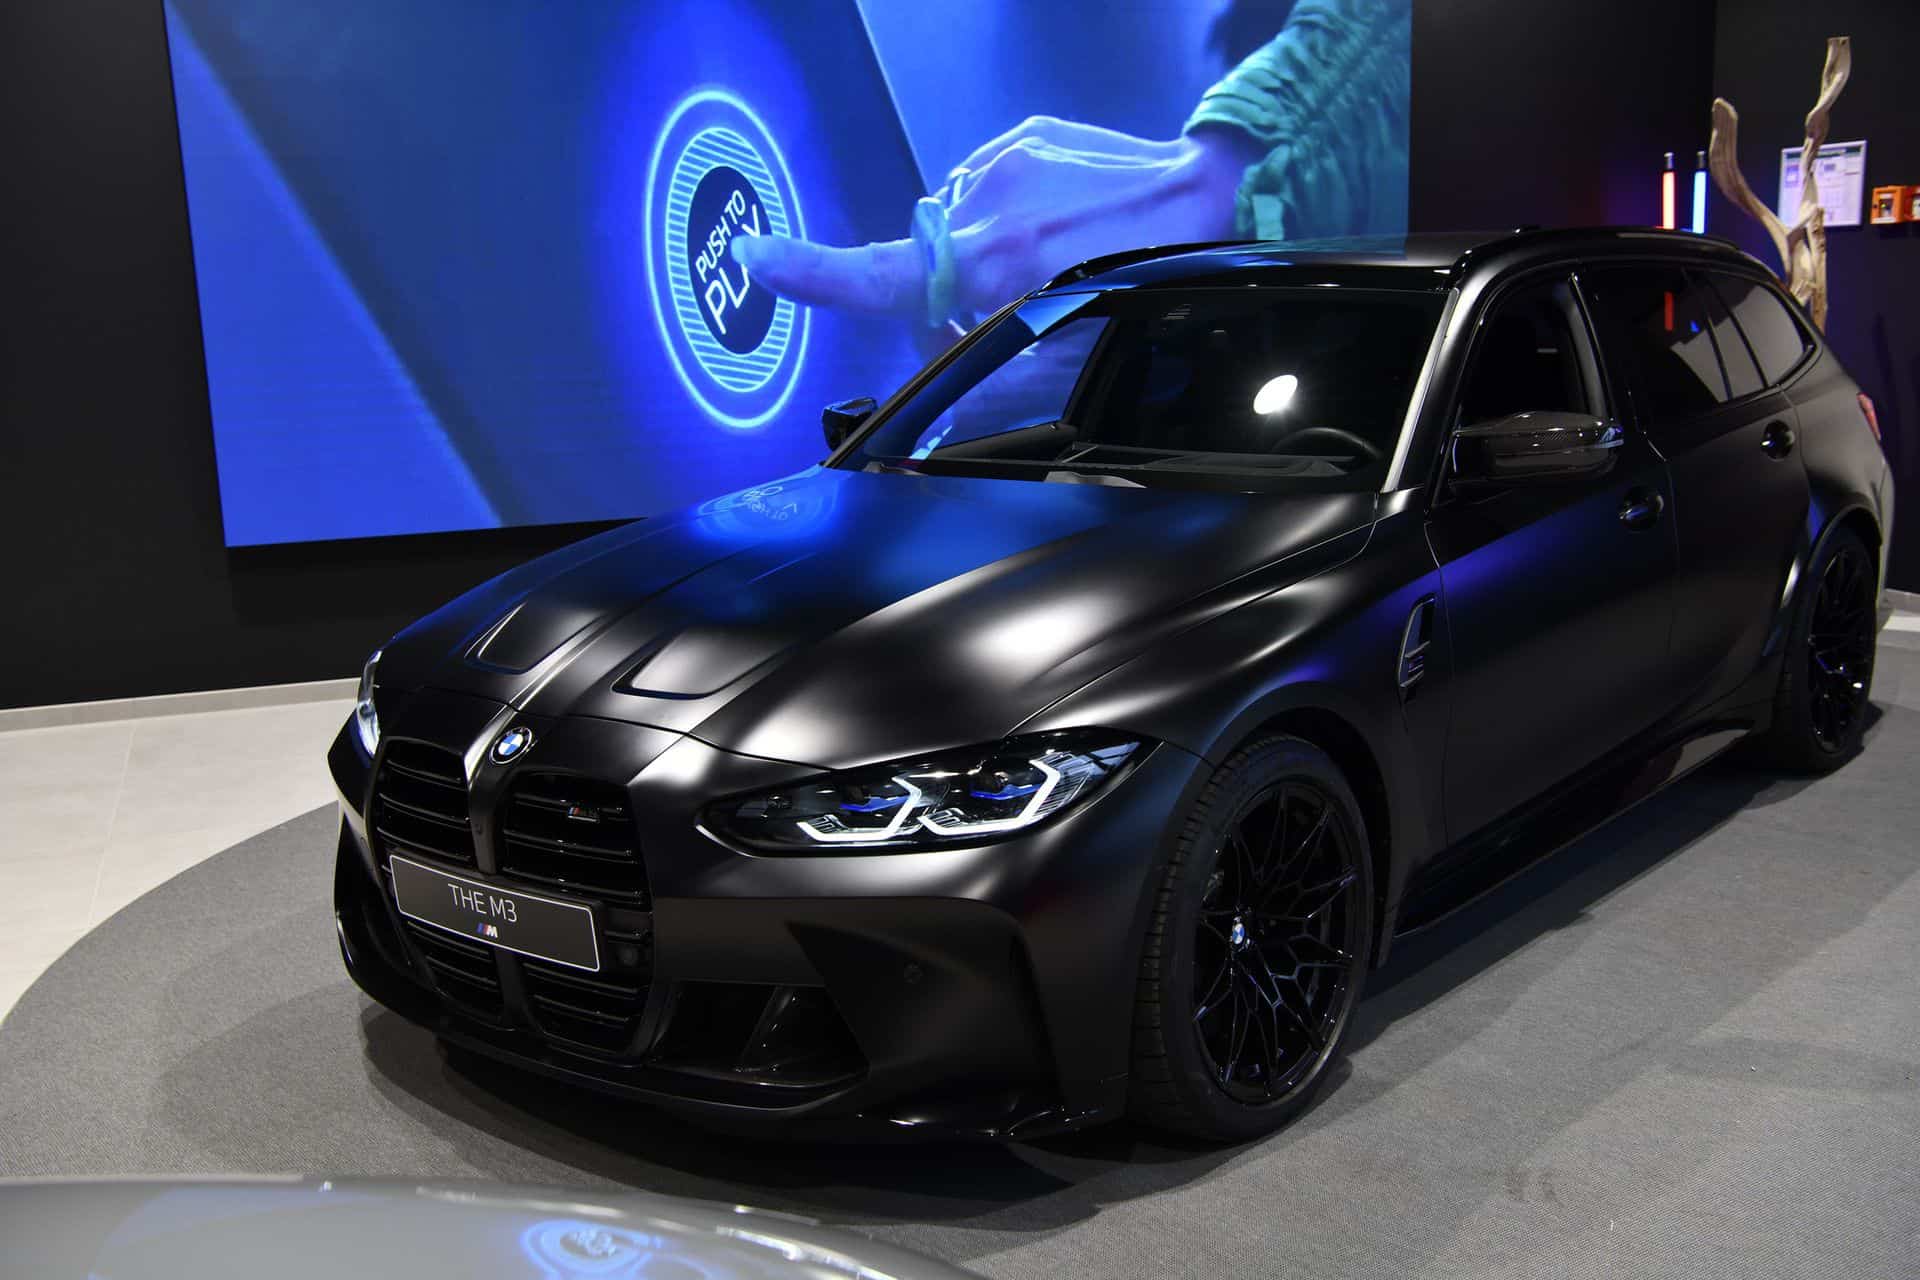 All-Black Bmw M3 Touring With Matte Paint Poses For The Camera